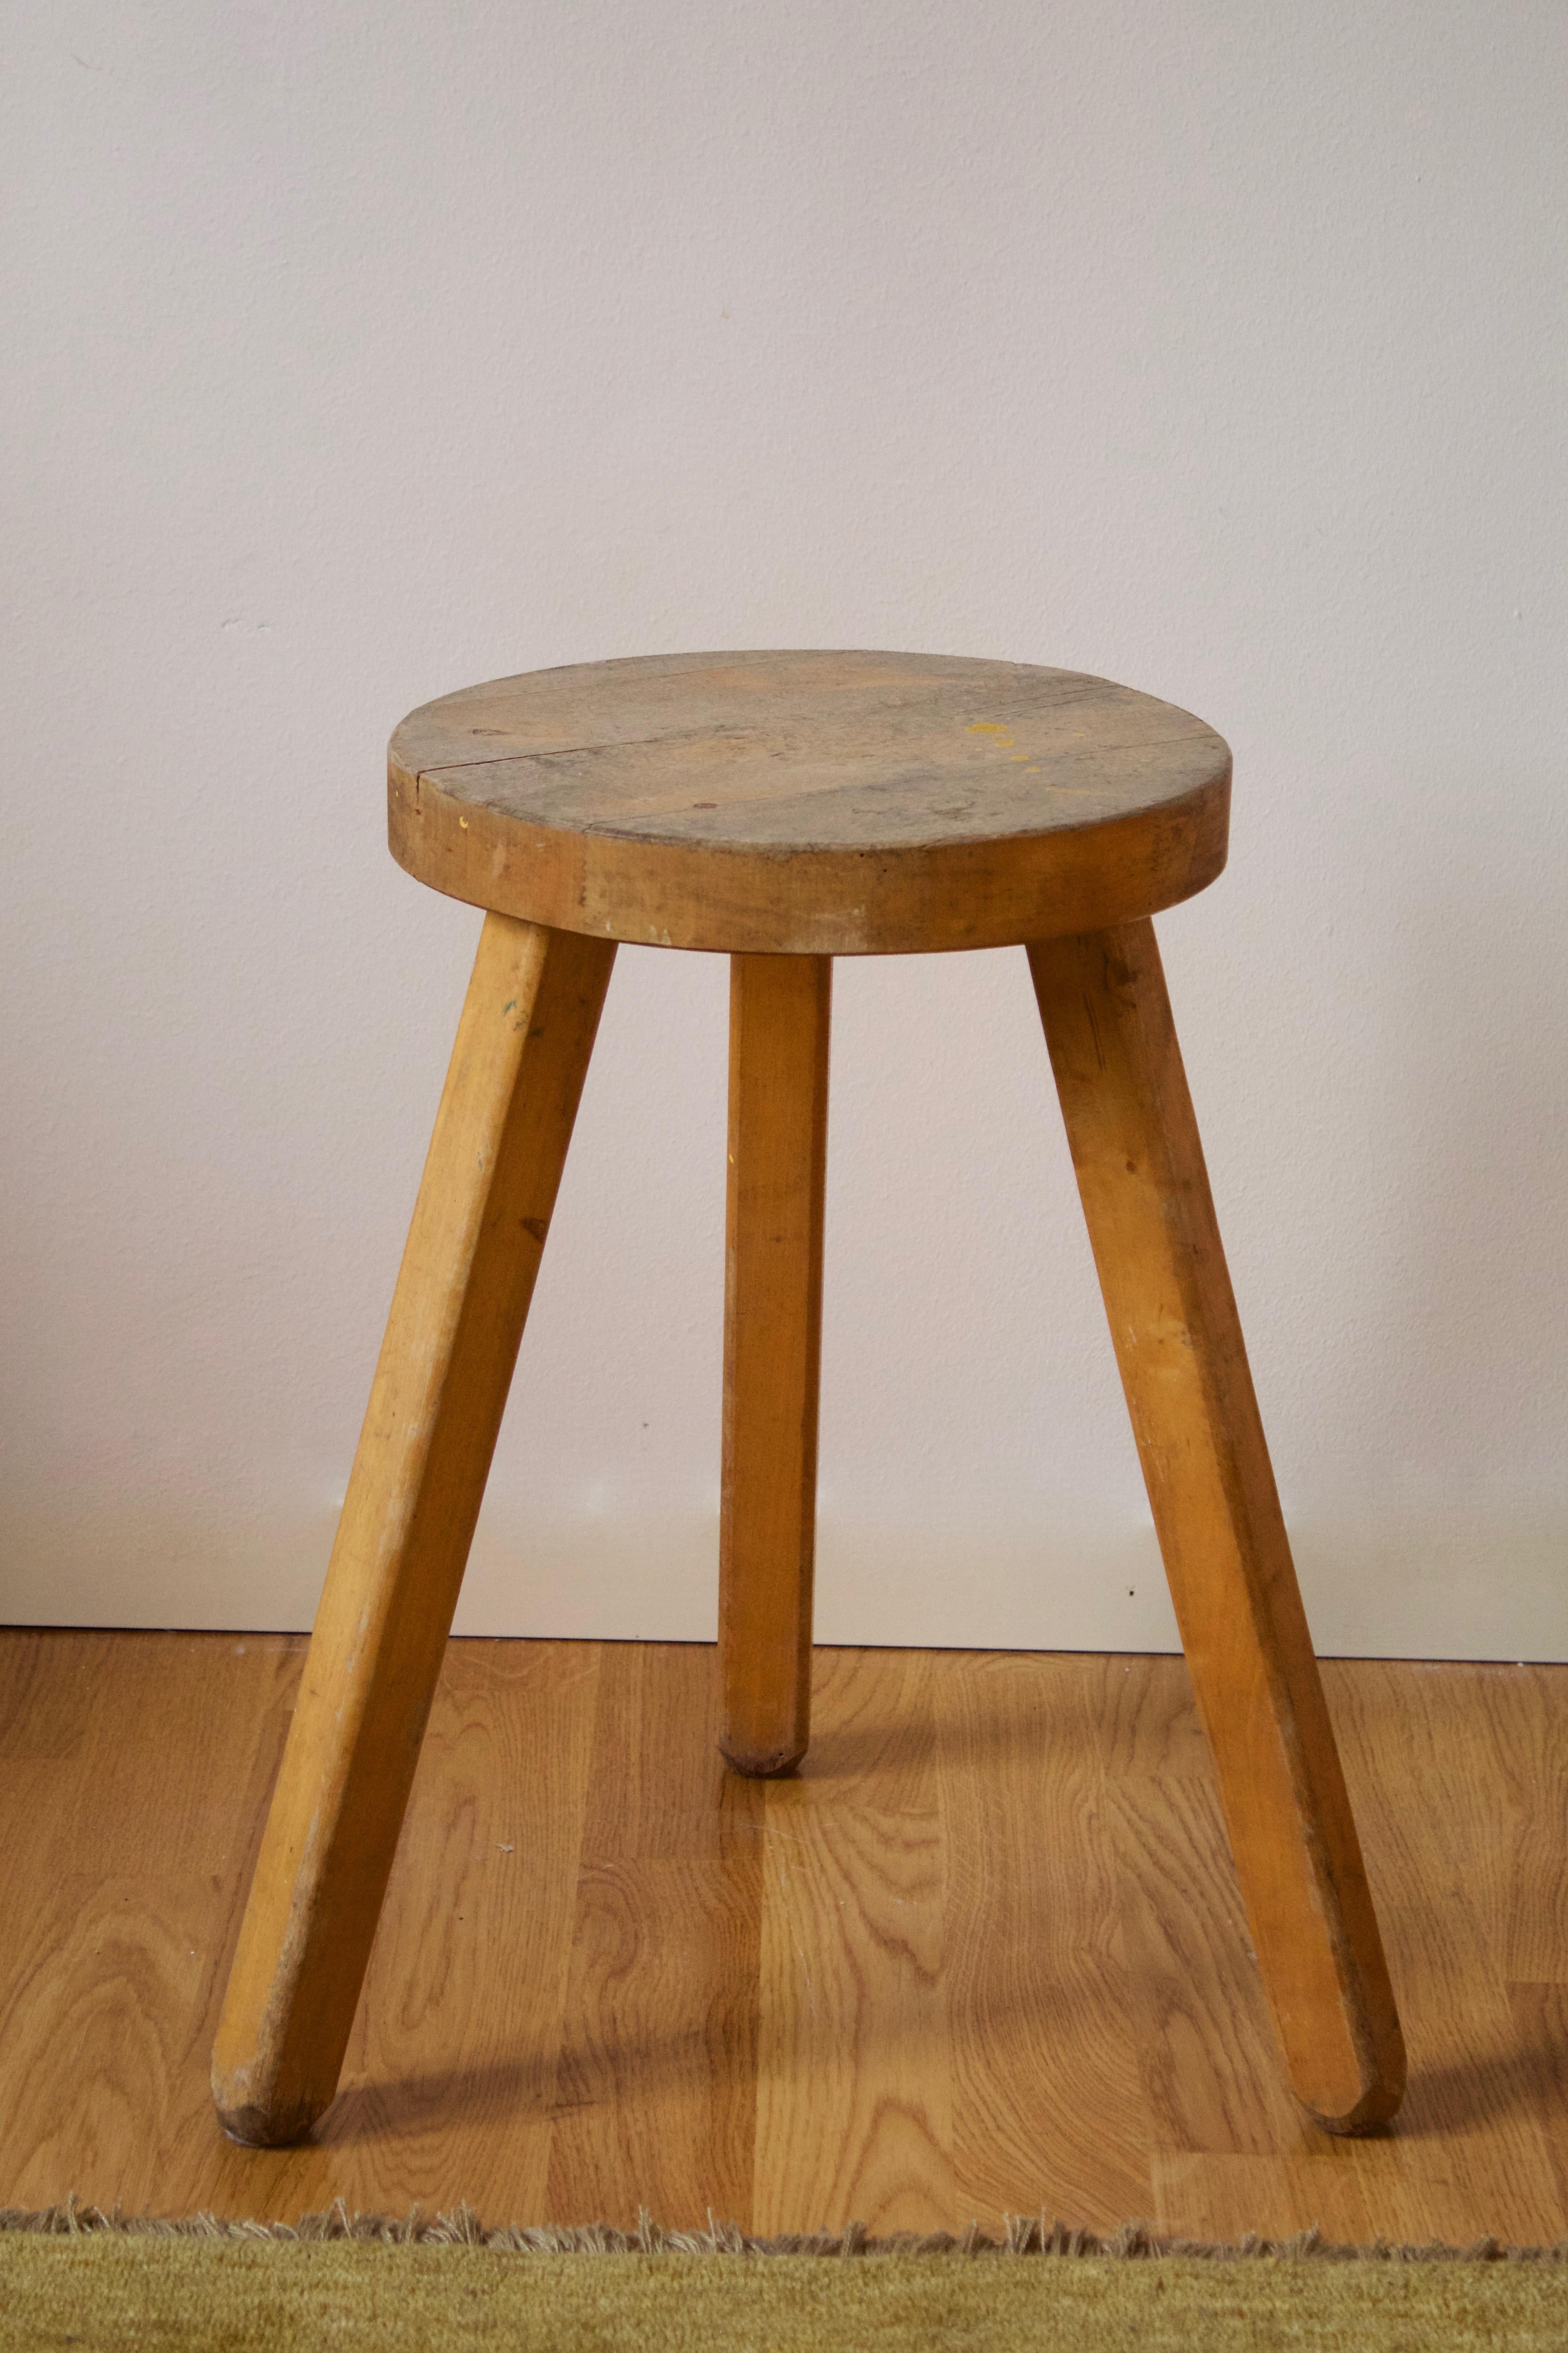 A small Swedish stool. By unknown designer, c. 1960s.





